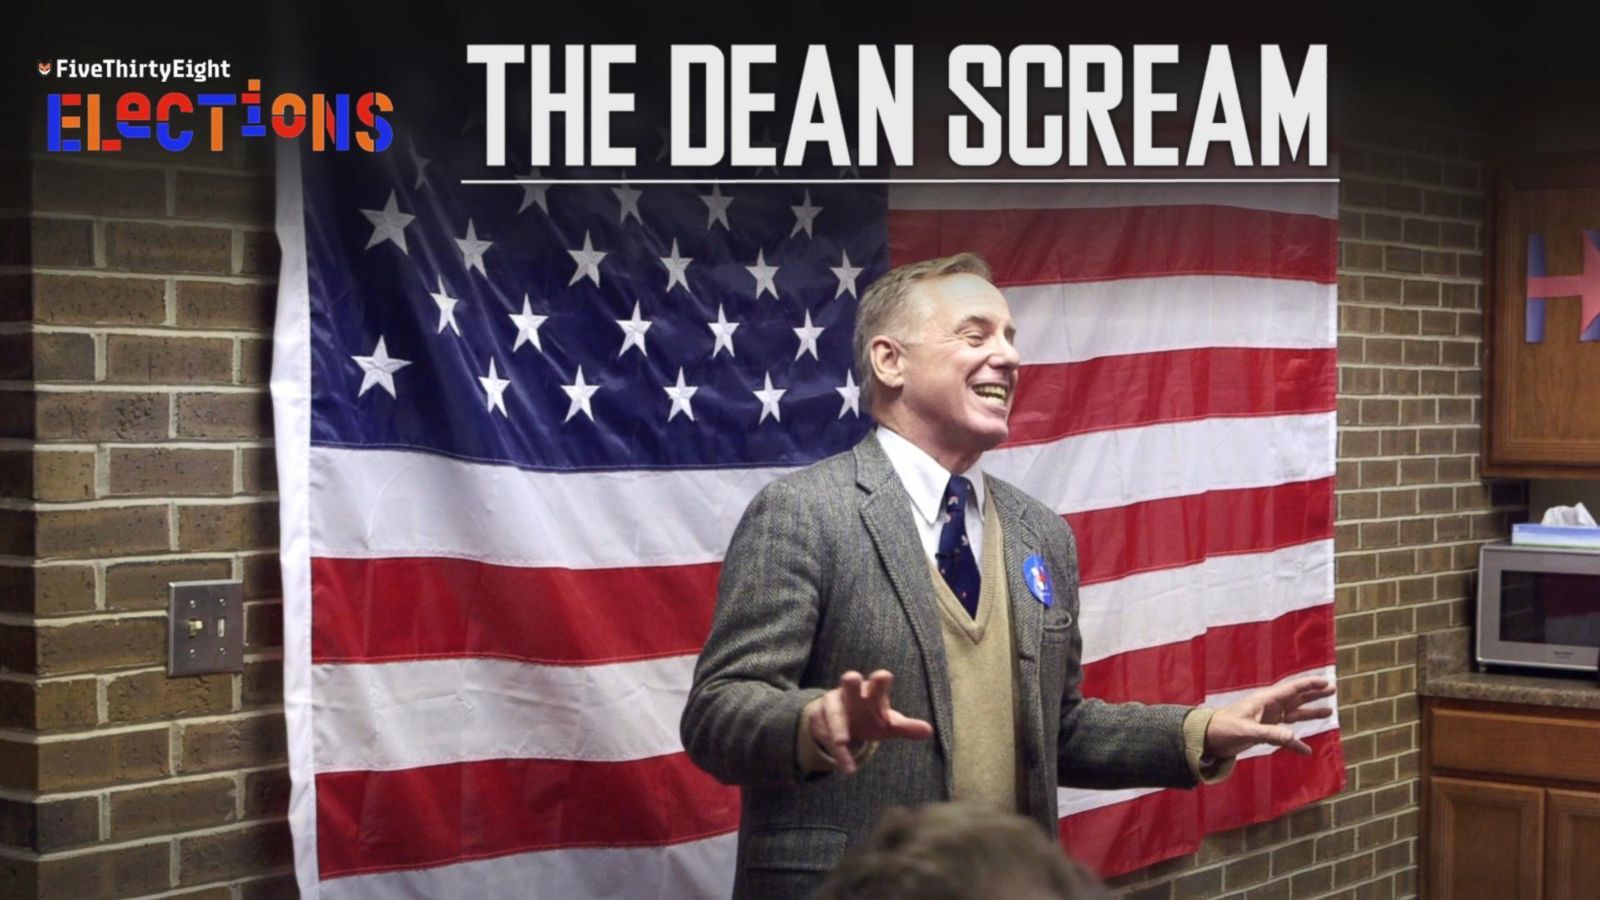 The Dean Scream: What Really Happened